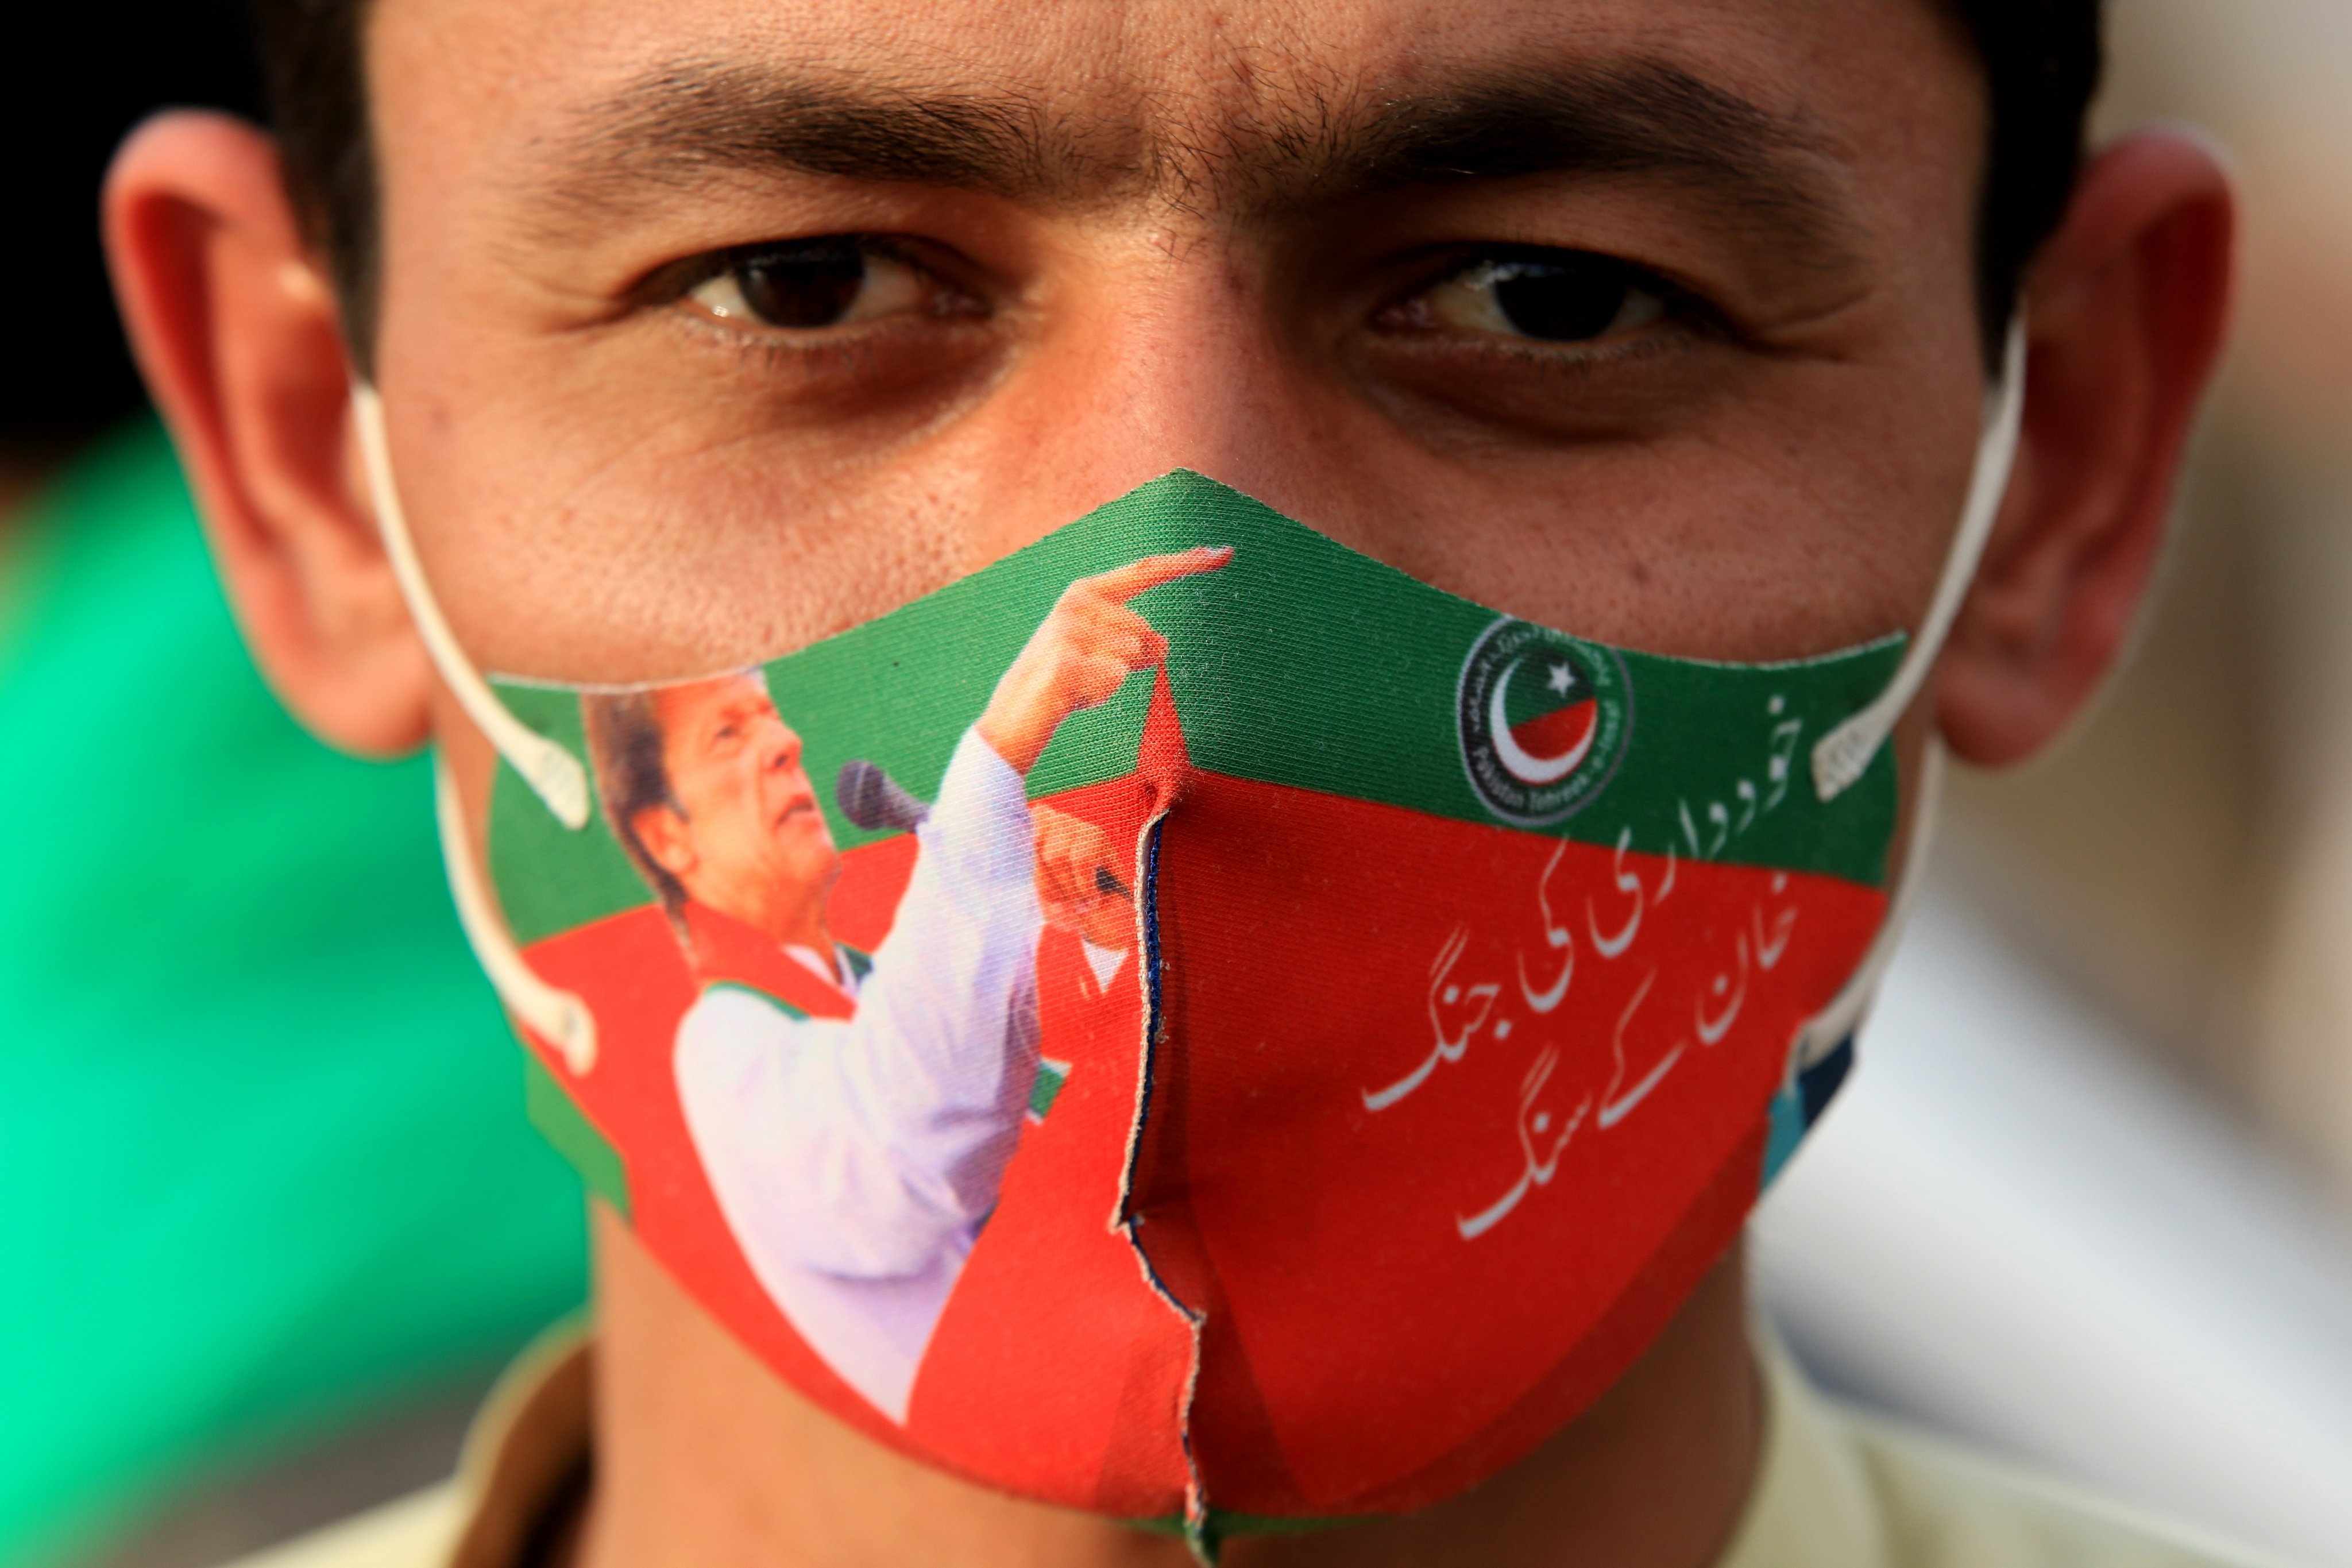 A supporter of Imran Khan’s PTI party gathers to protest against alleged vote rigging in the general elections, in Peshawar, Pakistan, on February 12. The country today stands at the cusp of a democratic breakthrough – but this will require the all-powerful military to take the historic decision to yield space to civilian supremacy. Photo: EPA-EFE